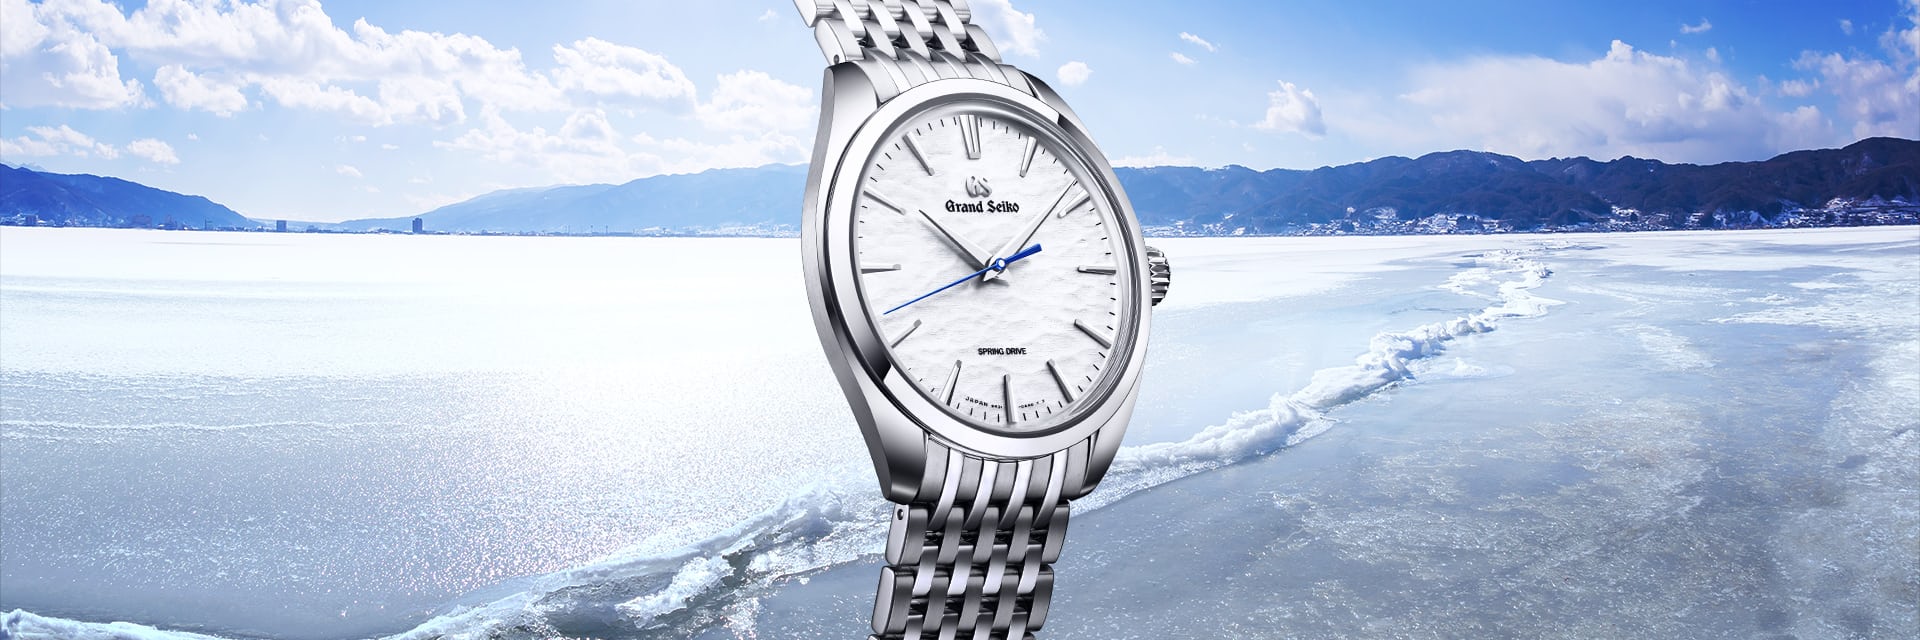 Grand Seiko introduces the SBGY013 Omiwatari, among 4 new releases